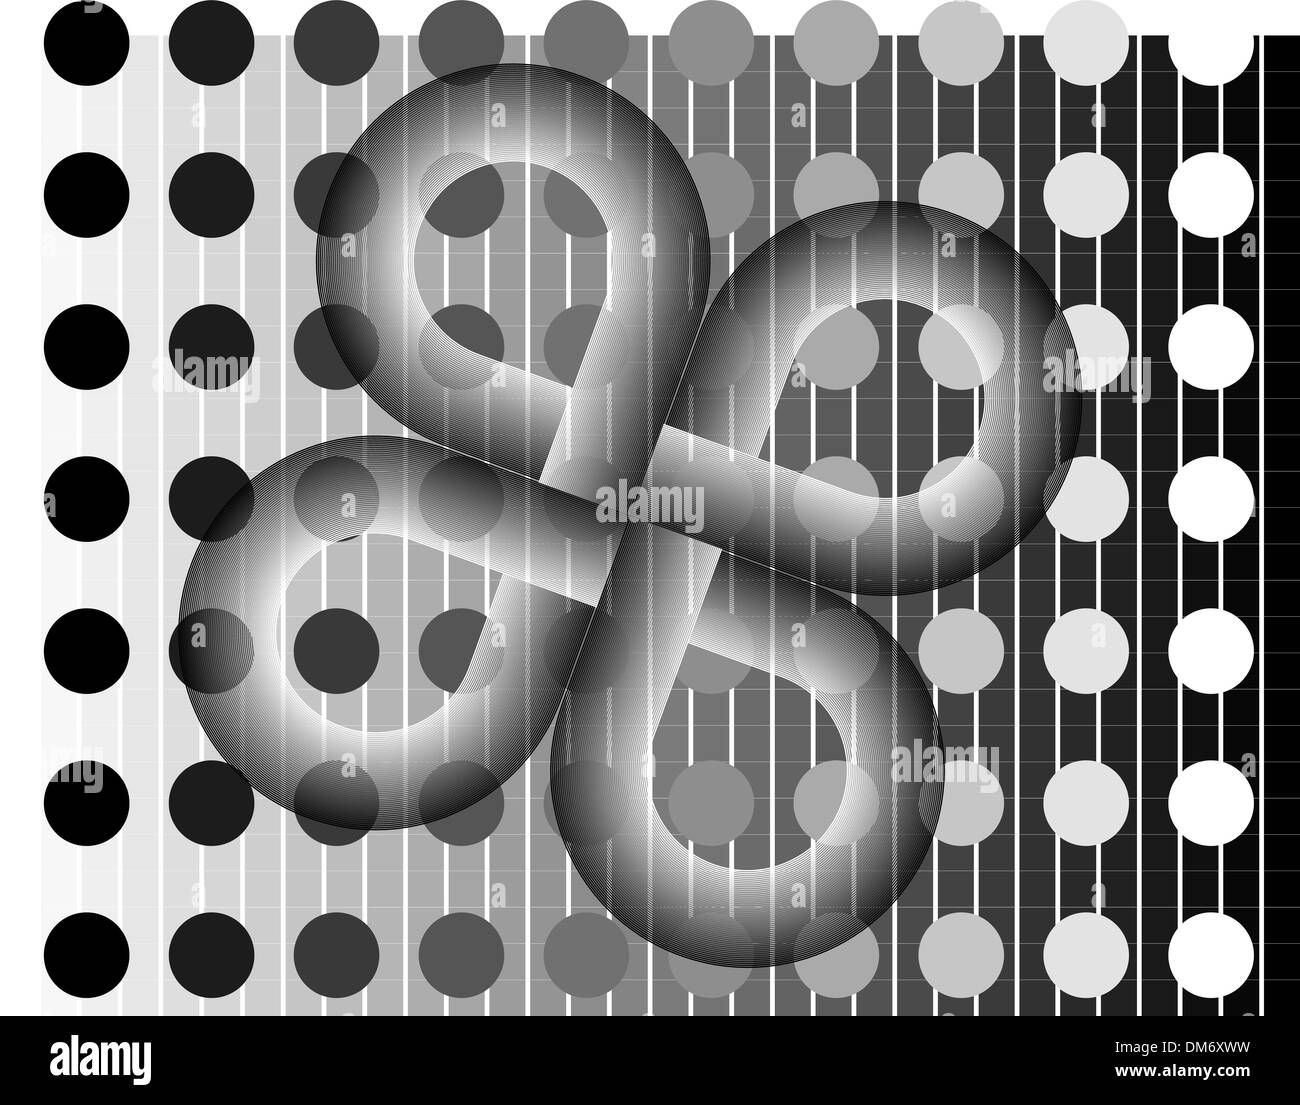 Black and white background for your text. Stock Vector